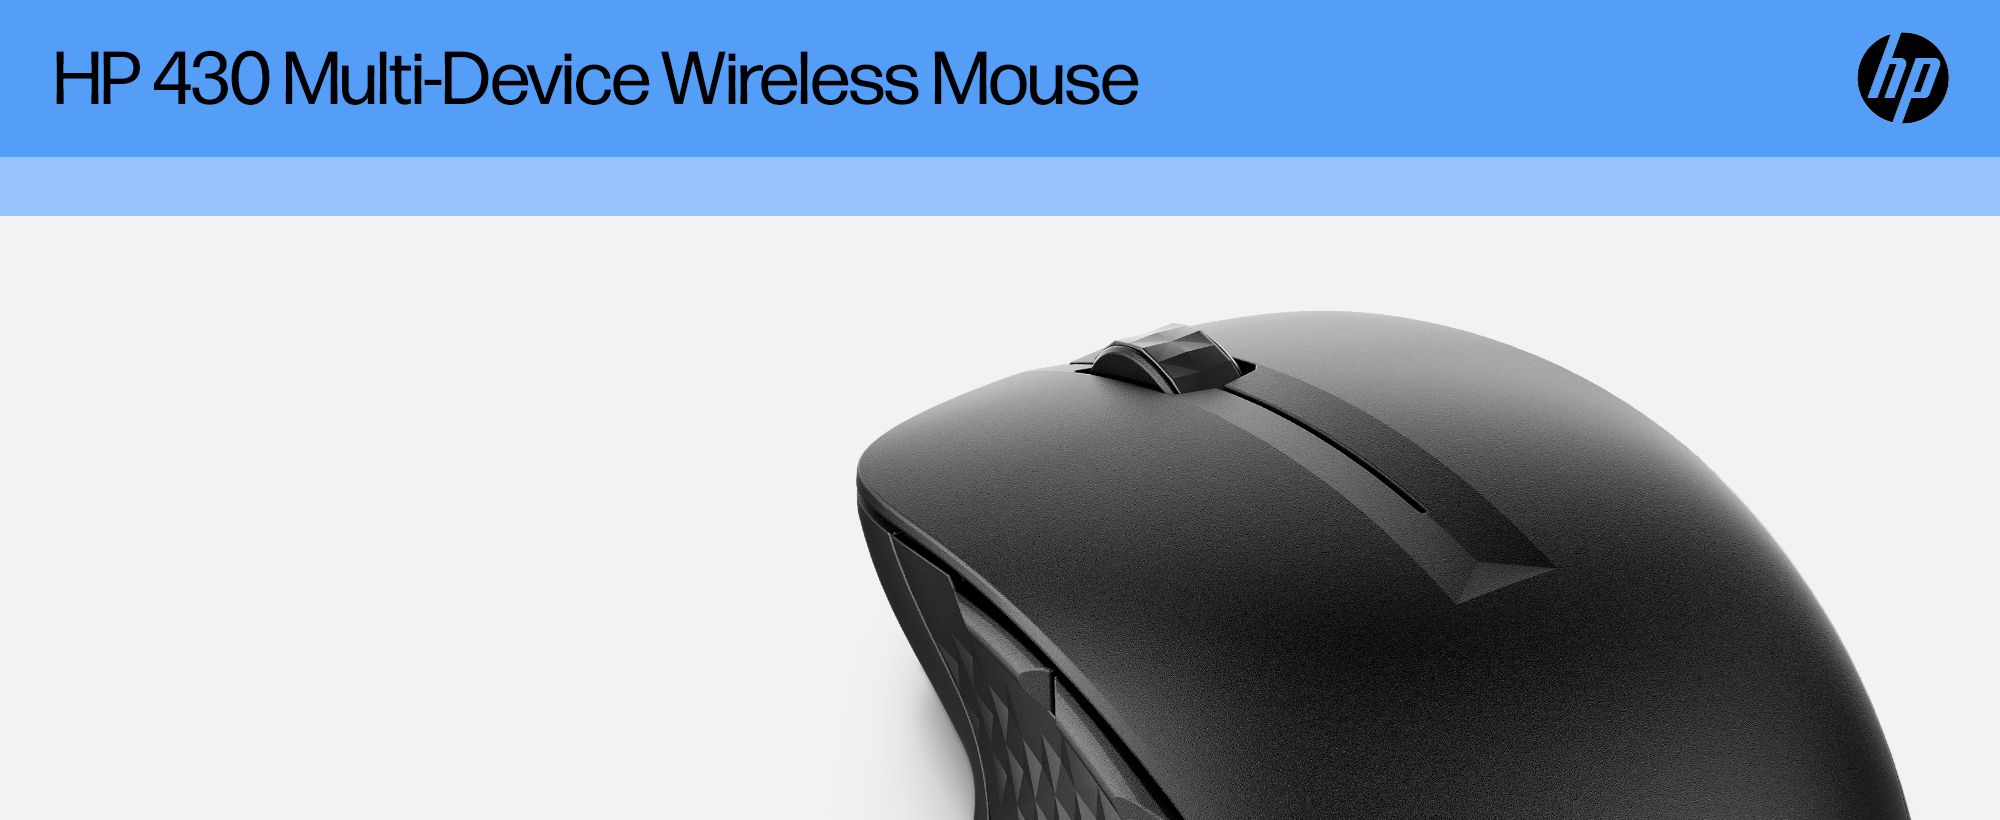 Mouse - 430 - multi-device HP